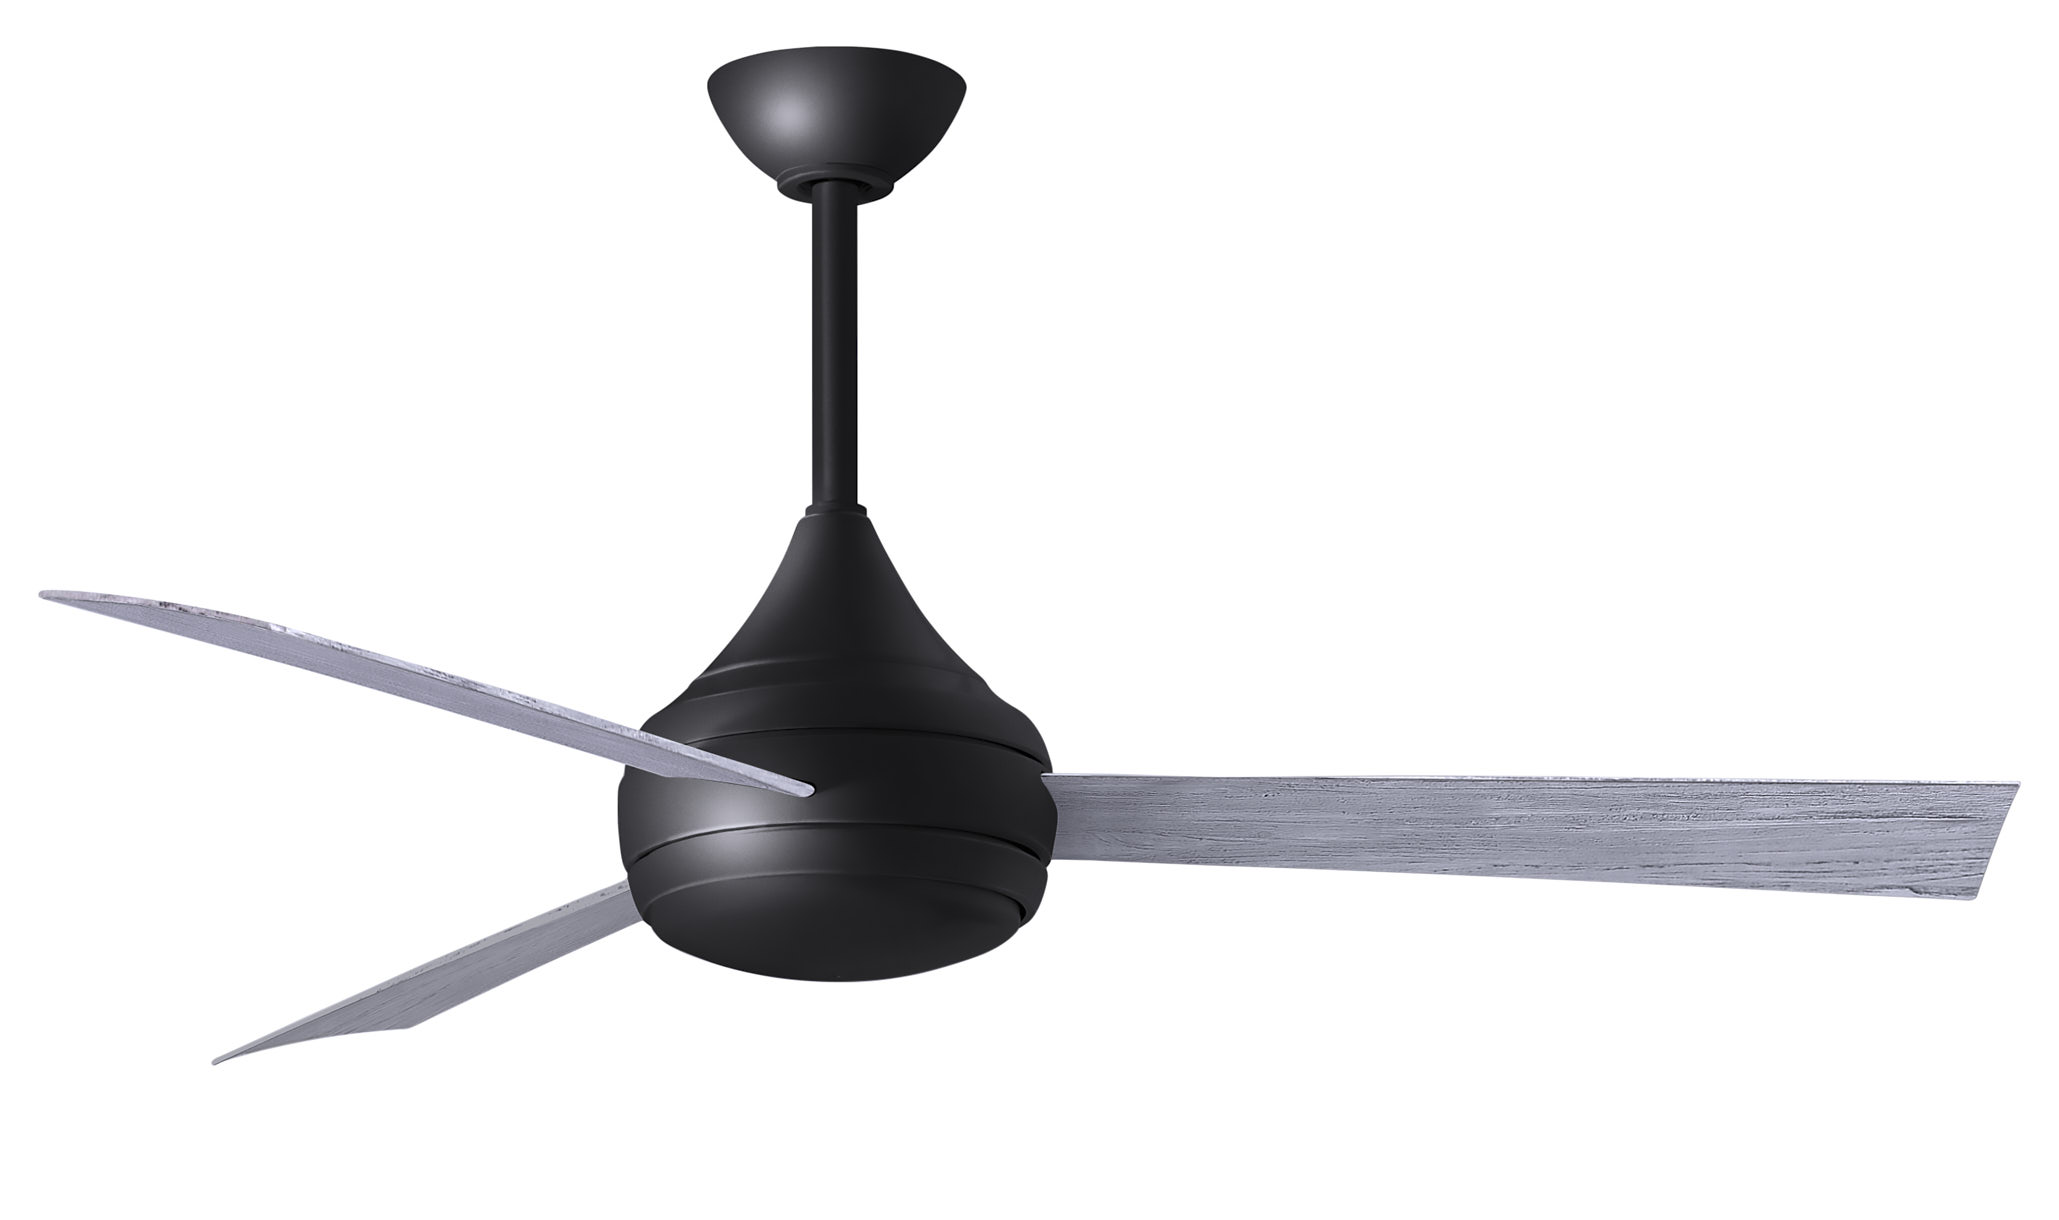 Donaire ceiling fan in Matte Black with Barn Wood blades with light cap manufactured by Matthews Fan Company.